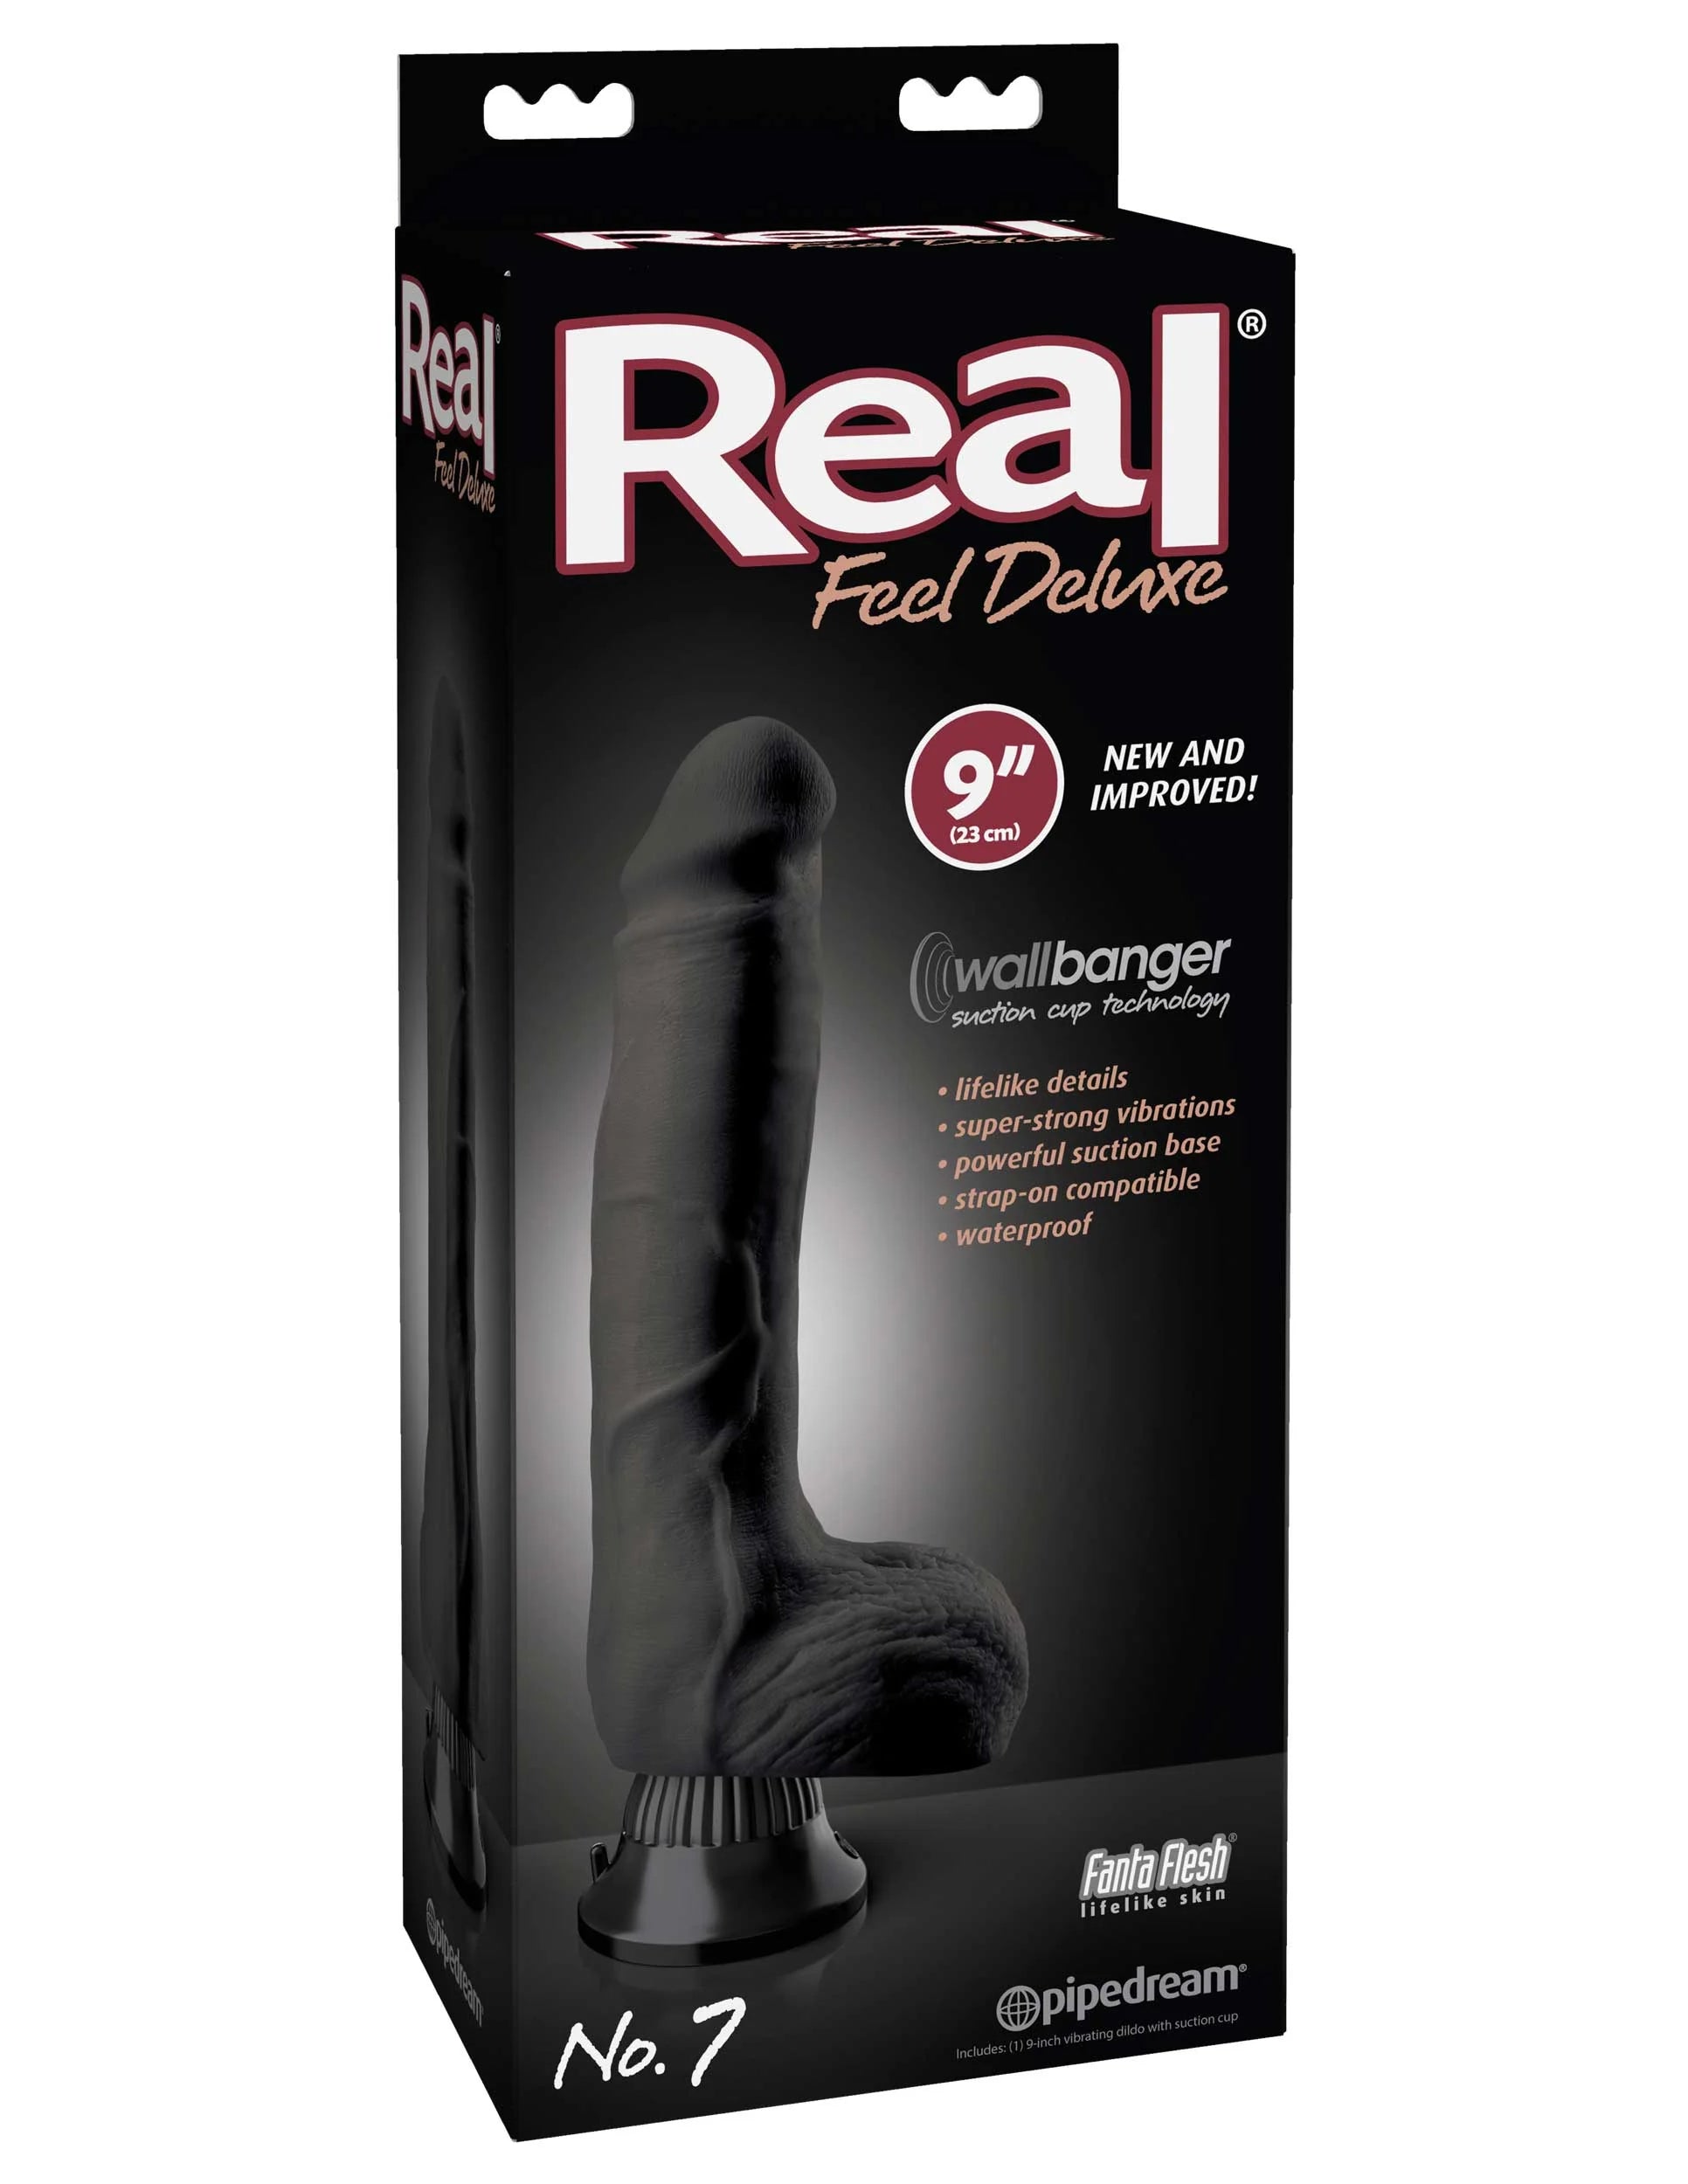 Pipedream Real Feel Deluxe No. 7 Realistic 9 in. Vibrating Dildo With Balls and Suction Cup